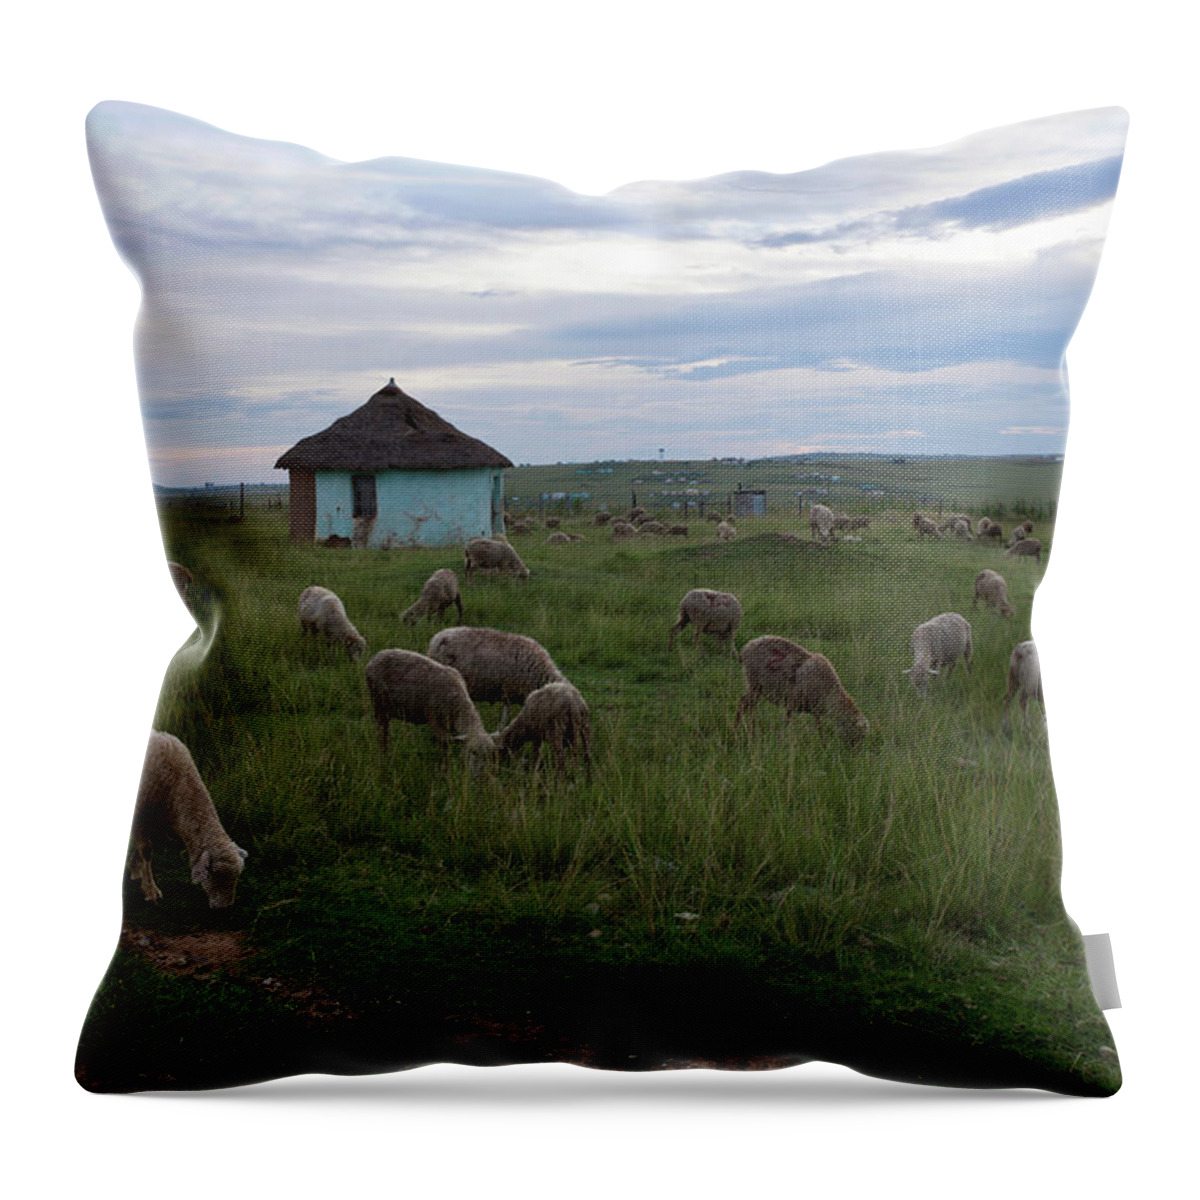 Tranquility Throw Pillow featuring the photograph Sheep Ovis Aries Grazing Around by Neil Austen